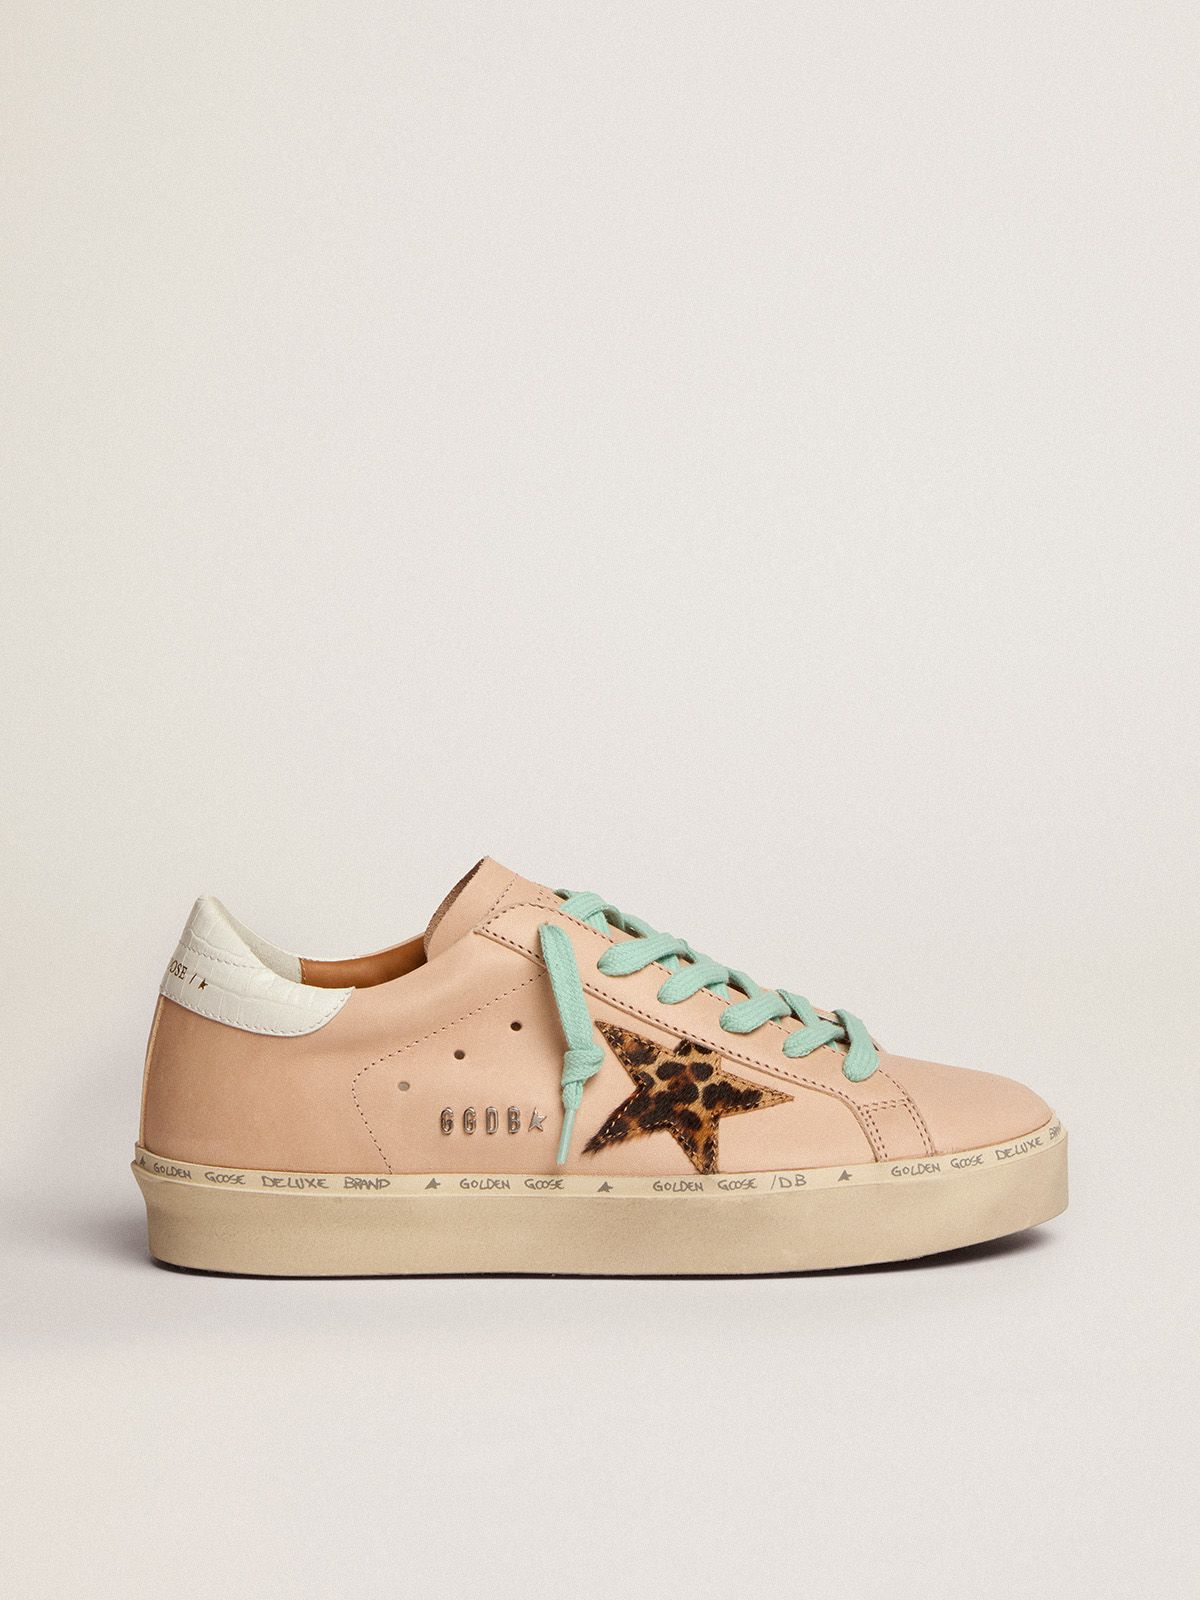 golden goose leopard-print leather white pony heel Star crocodile-print sneakers tab with and skin Hi star